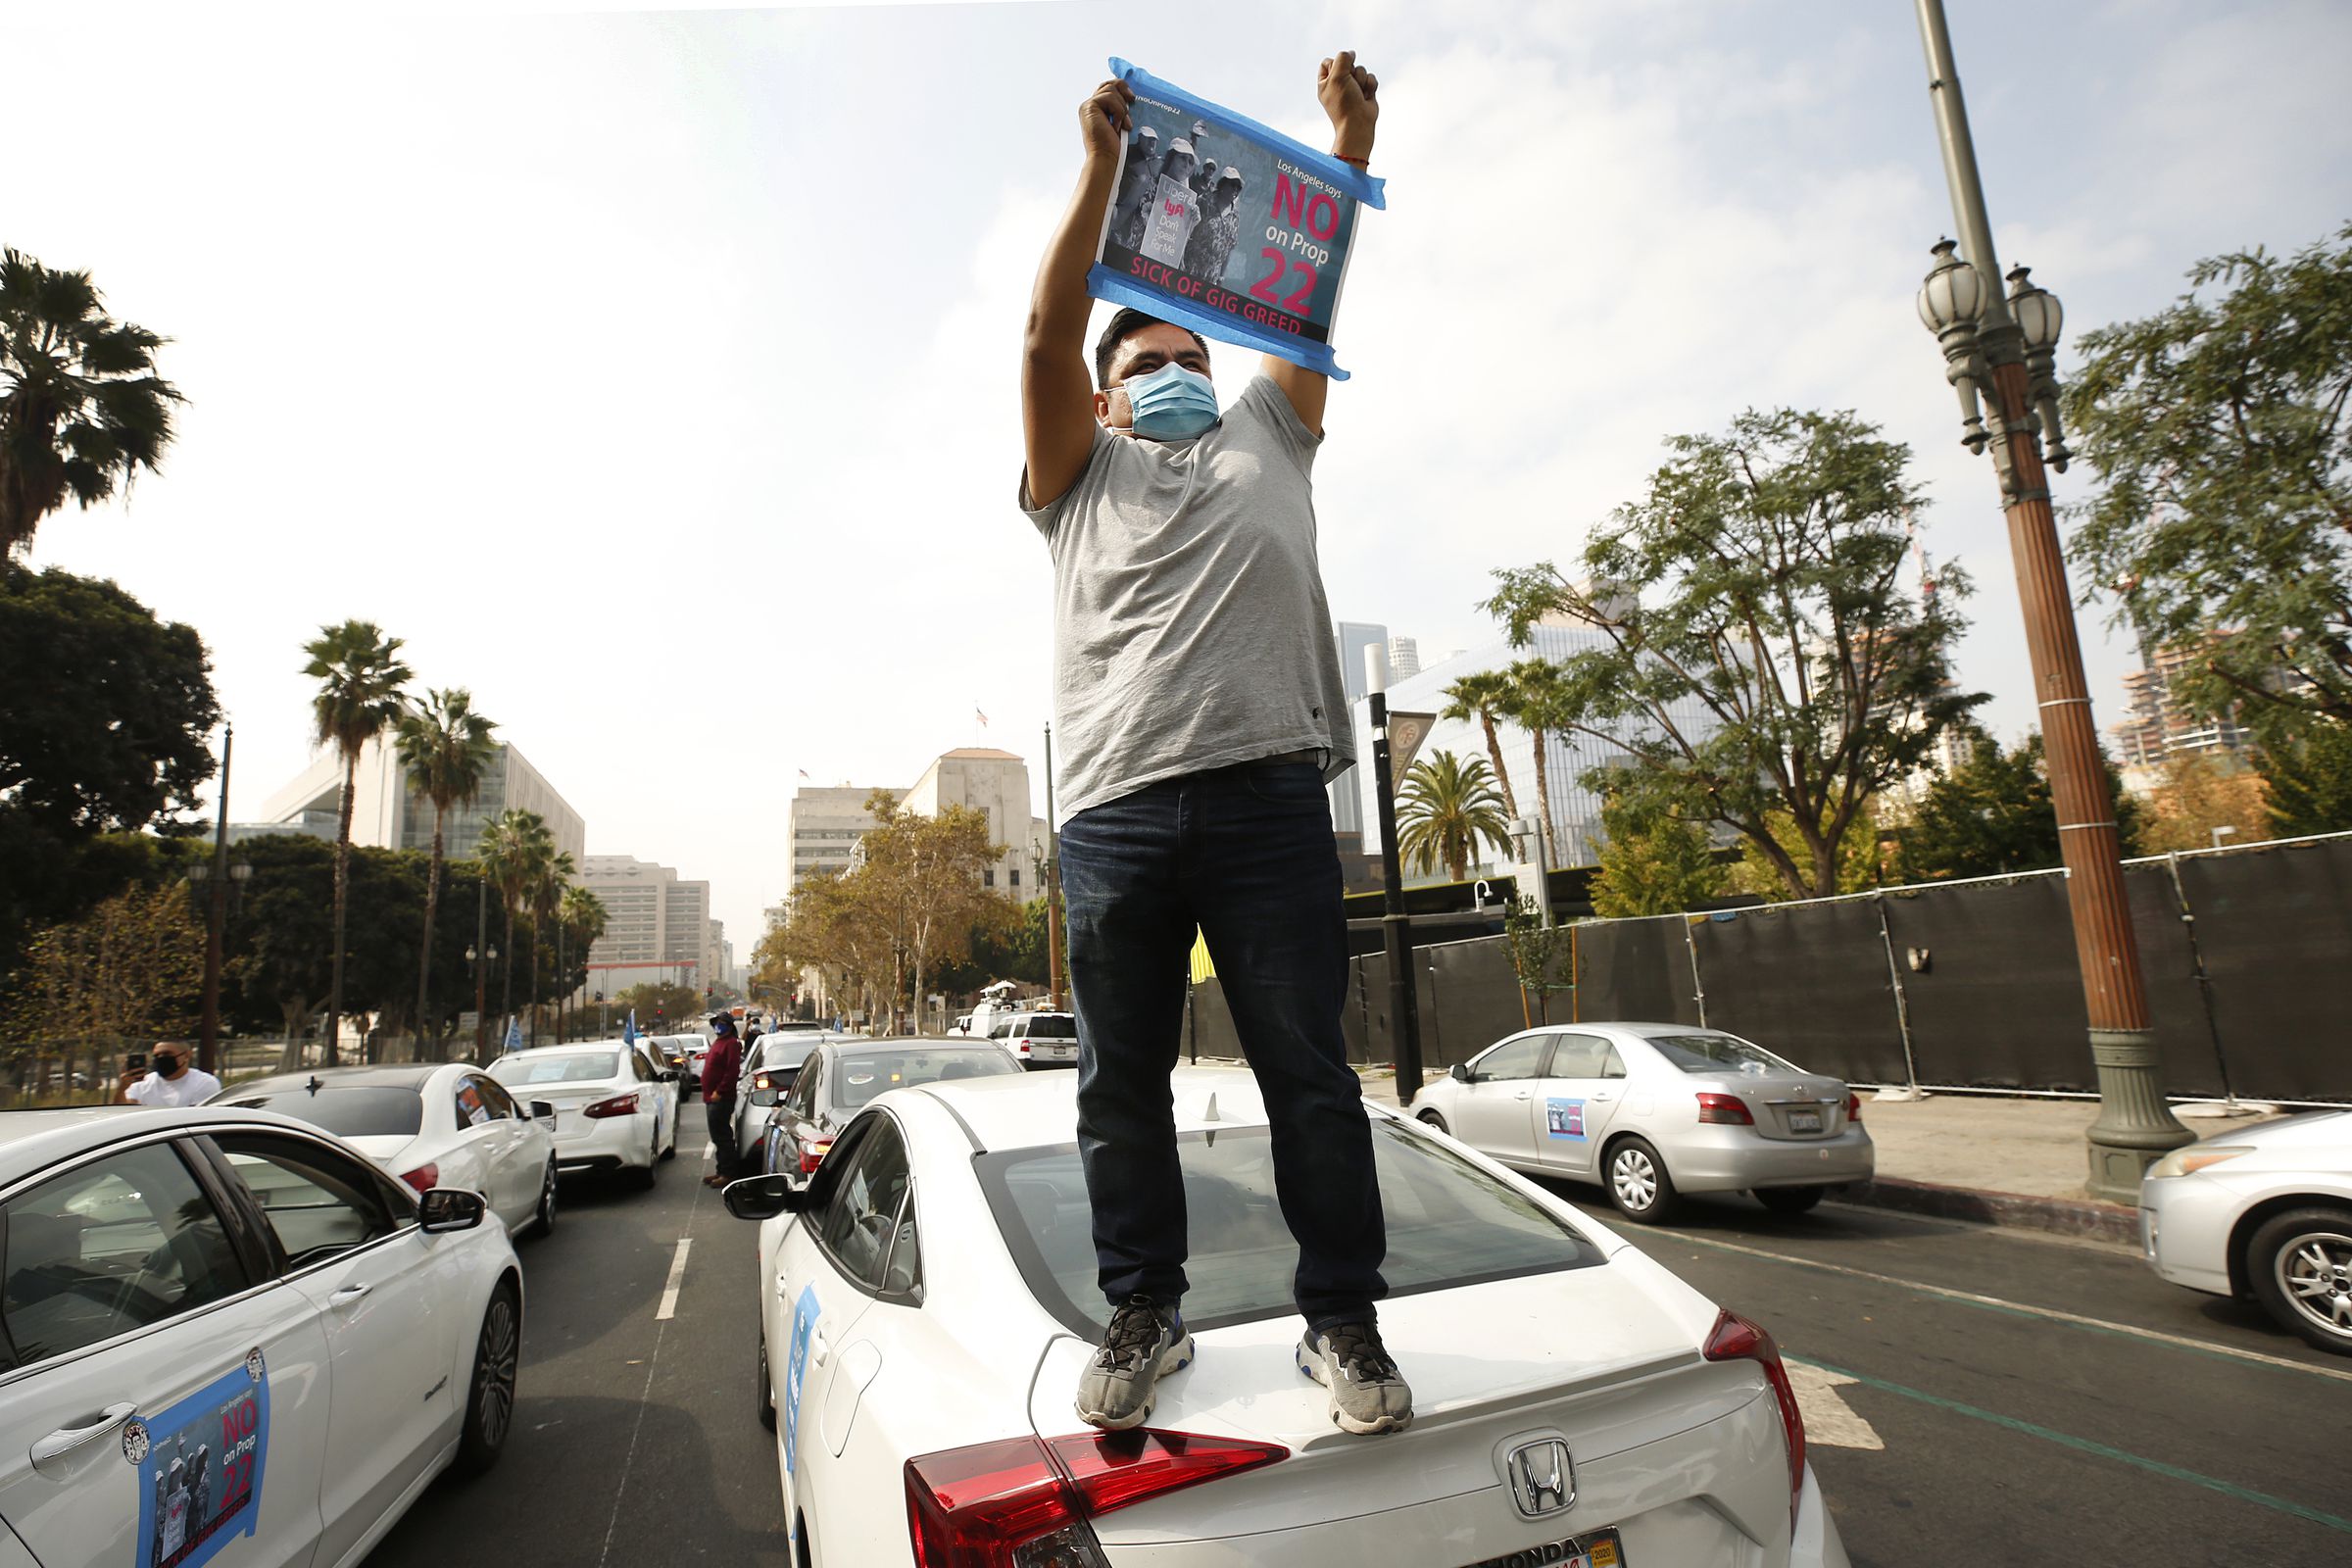 App based gig workers held a driving demonstration with 60-70 vehicles blocking Spring Street in front of Los Angeles City Hall urging voters to vote no on Proposition 22, a November ballot measure that would classify app-based drivers as independent contr